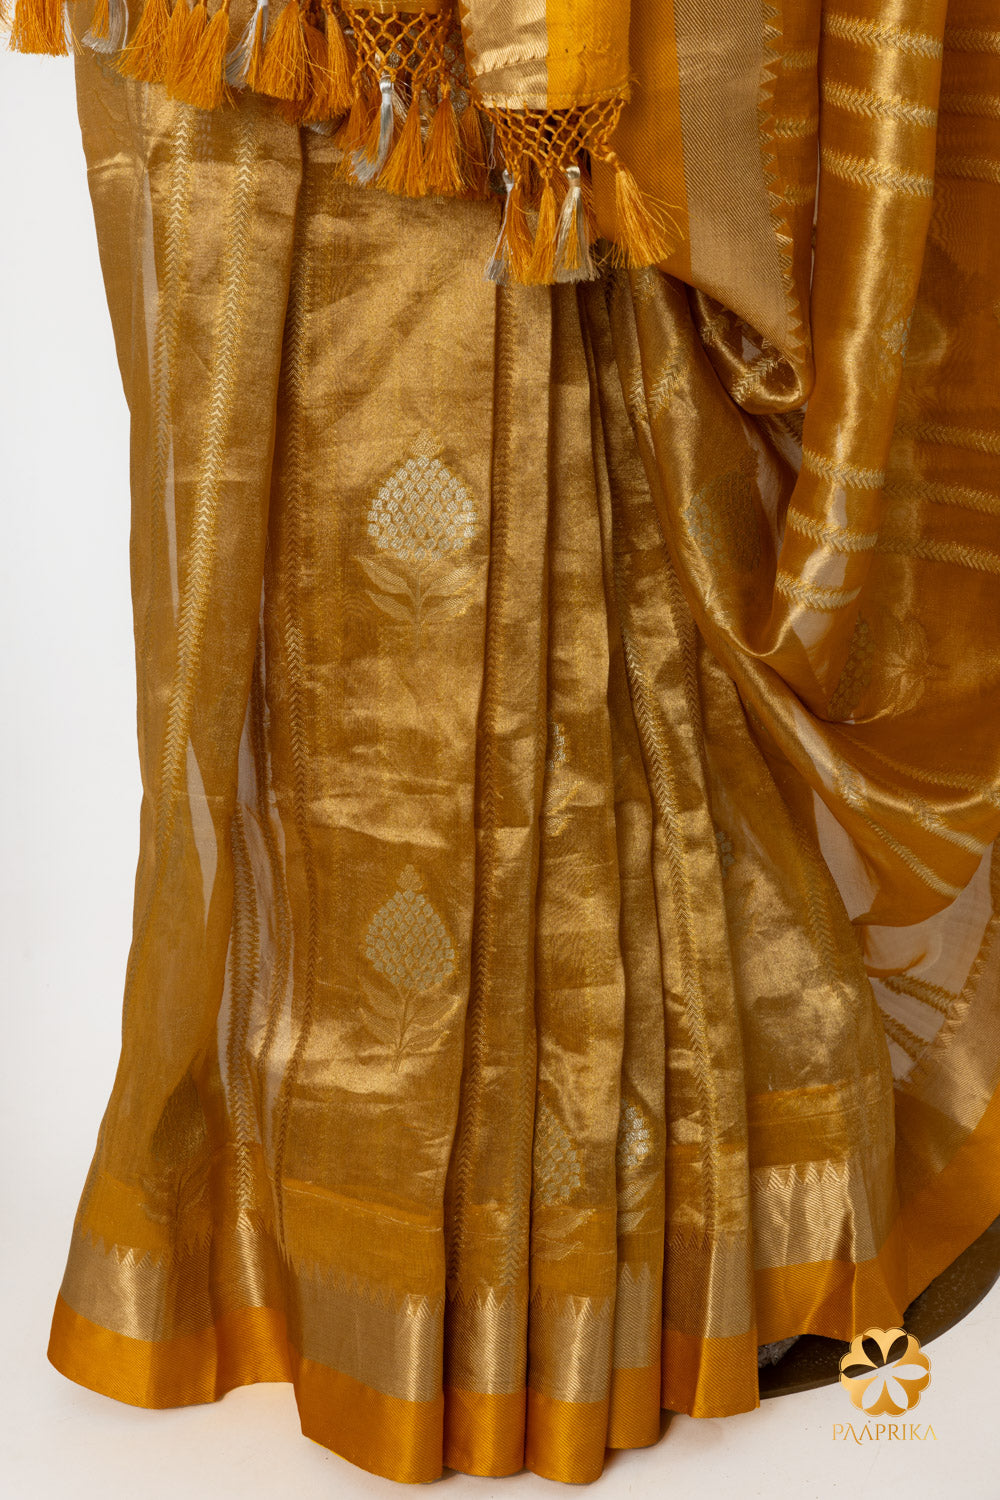 Luxurious golden tissue fabric of the saree, ensuring comfort and style.